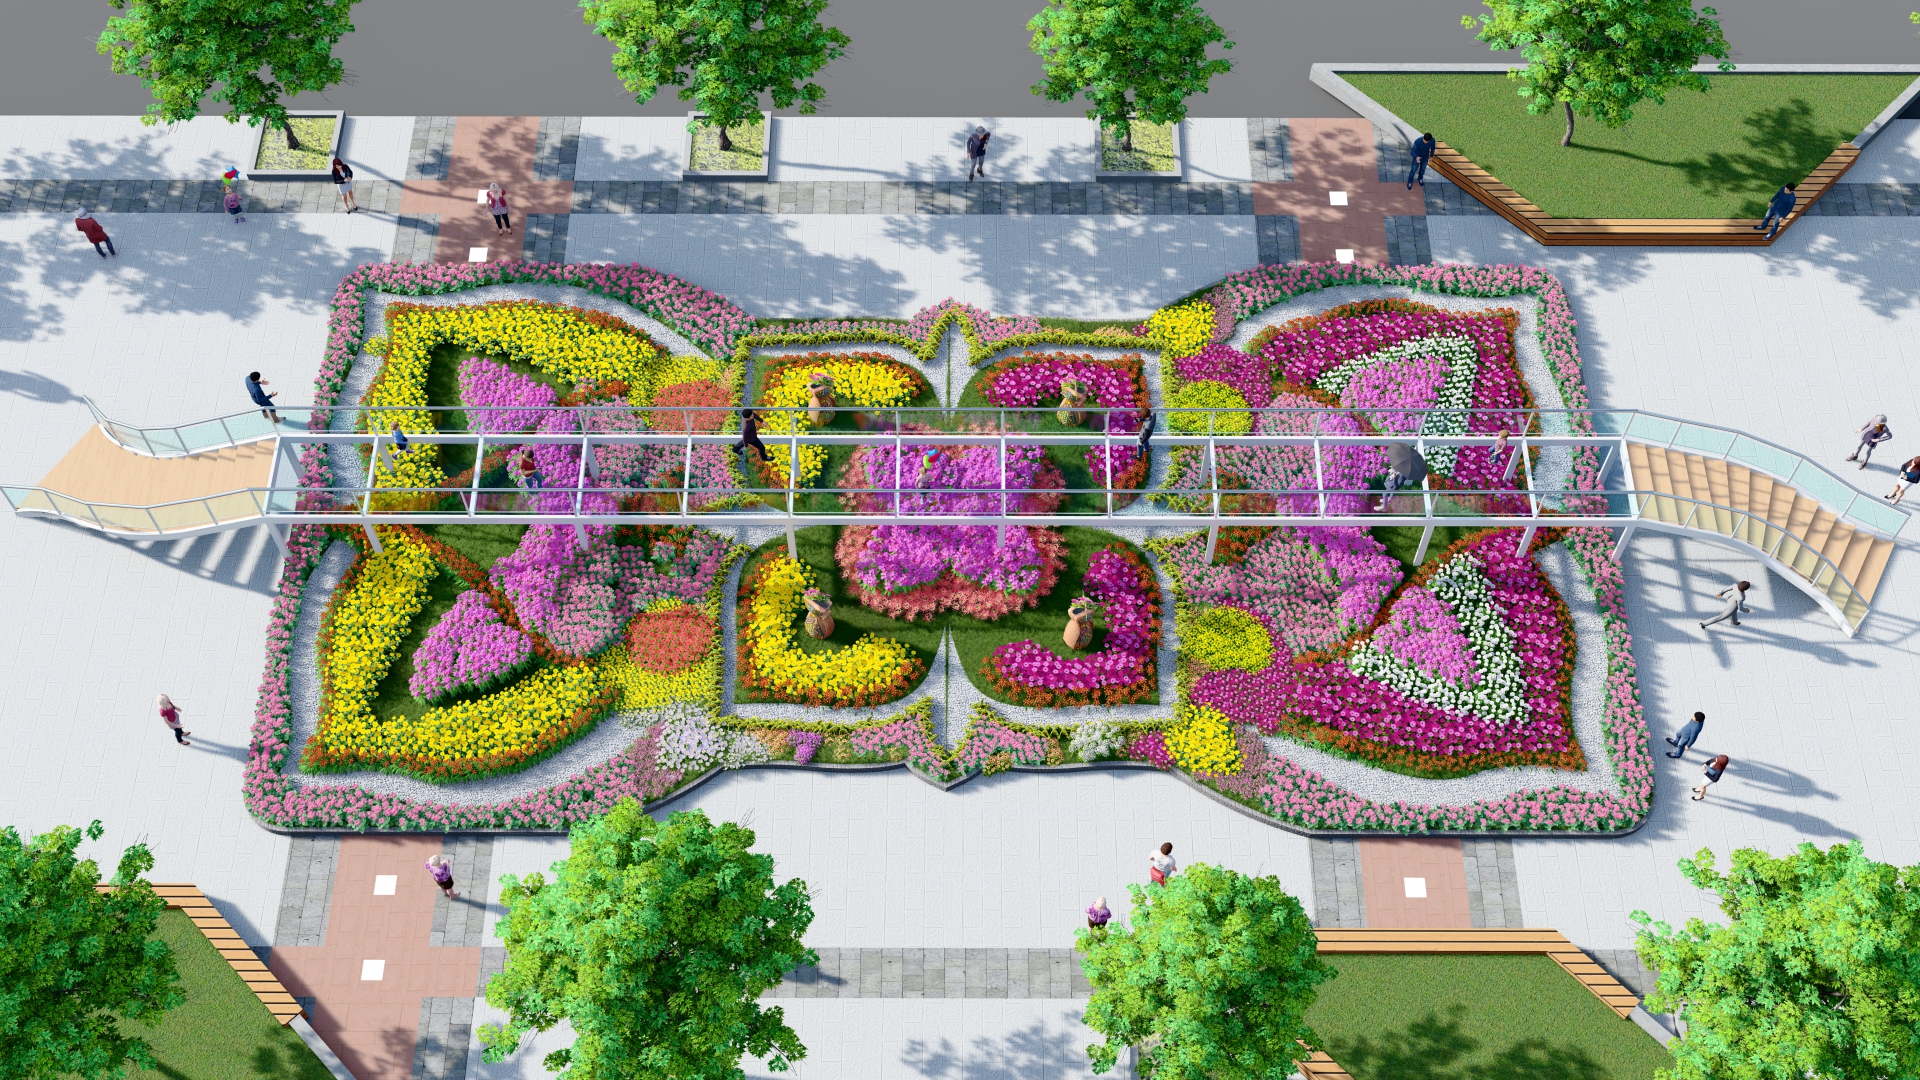 An architect’s impression of a glass bridge along the 2023 Nguyen Hue Flower Street in District 1, Ho Chi Minh City.